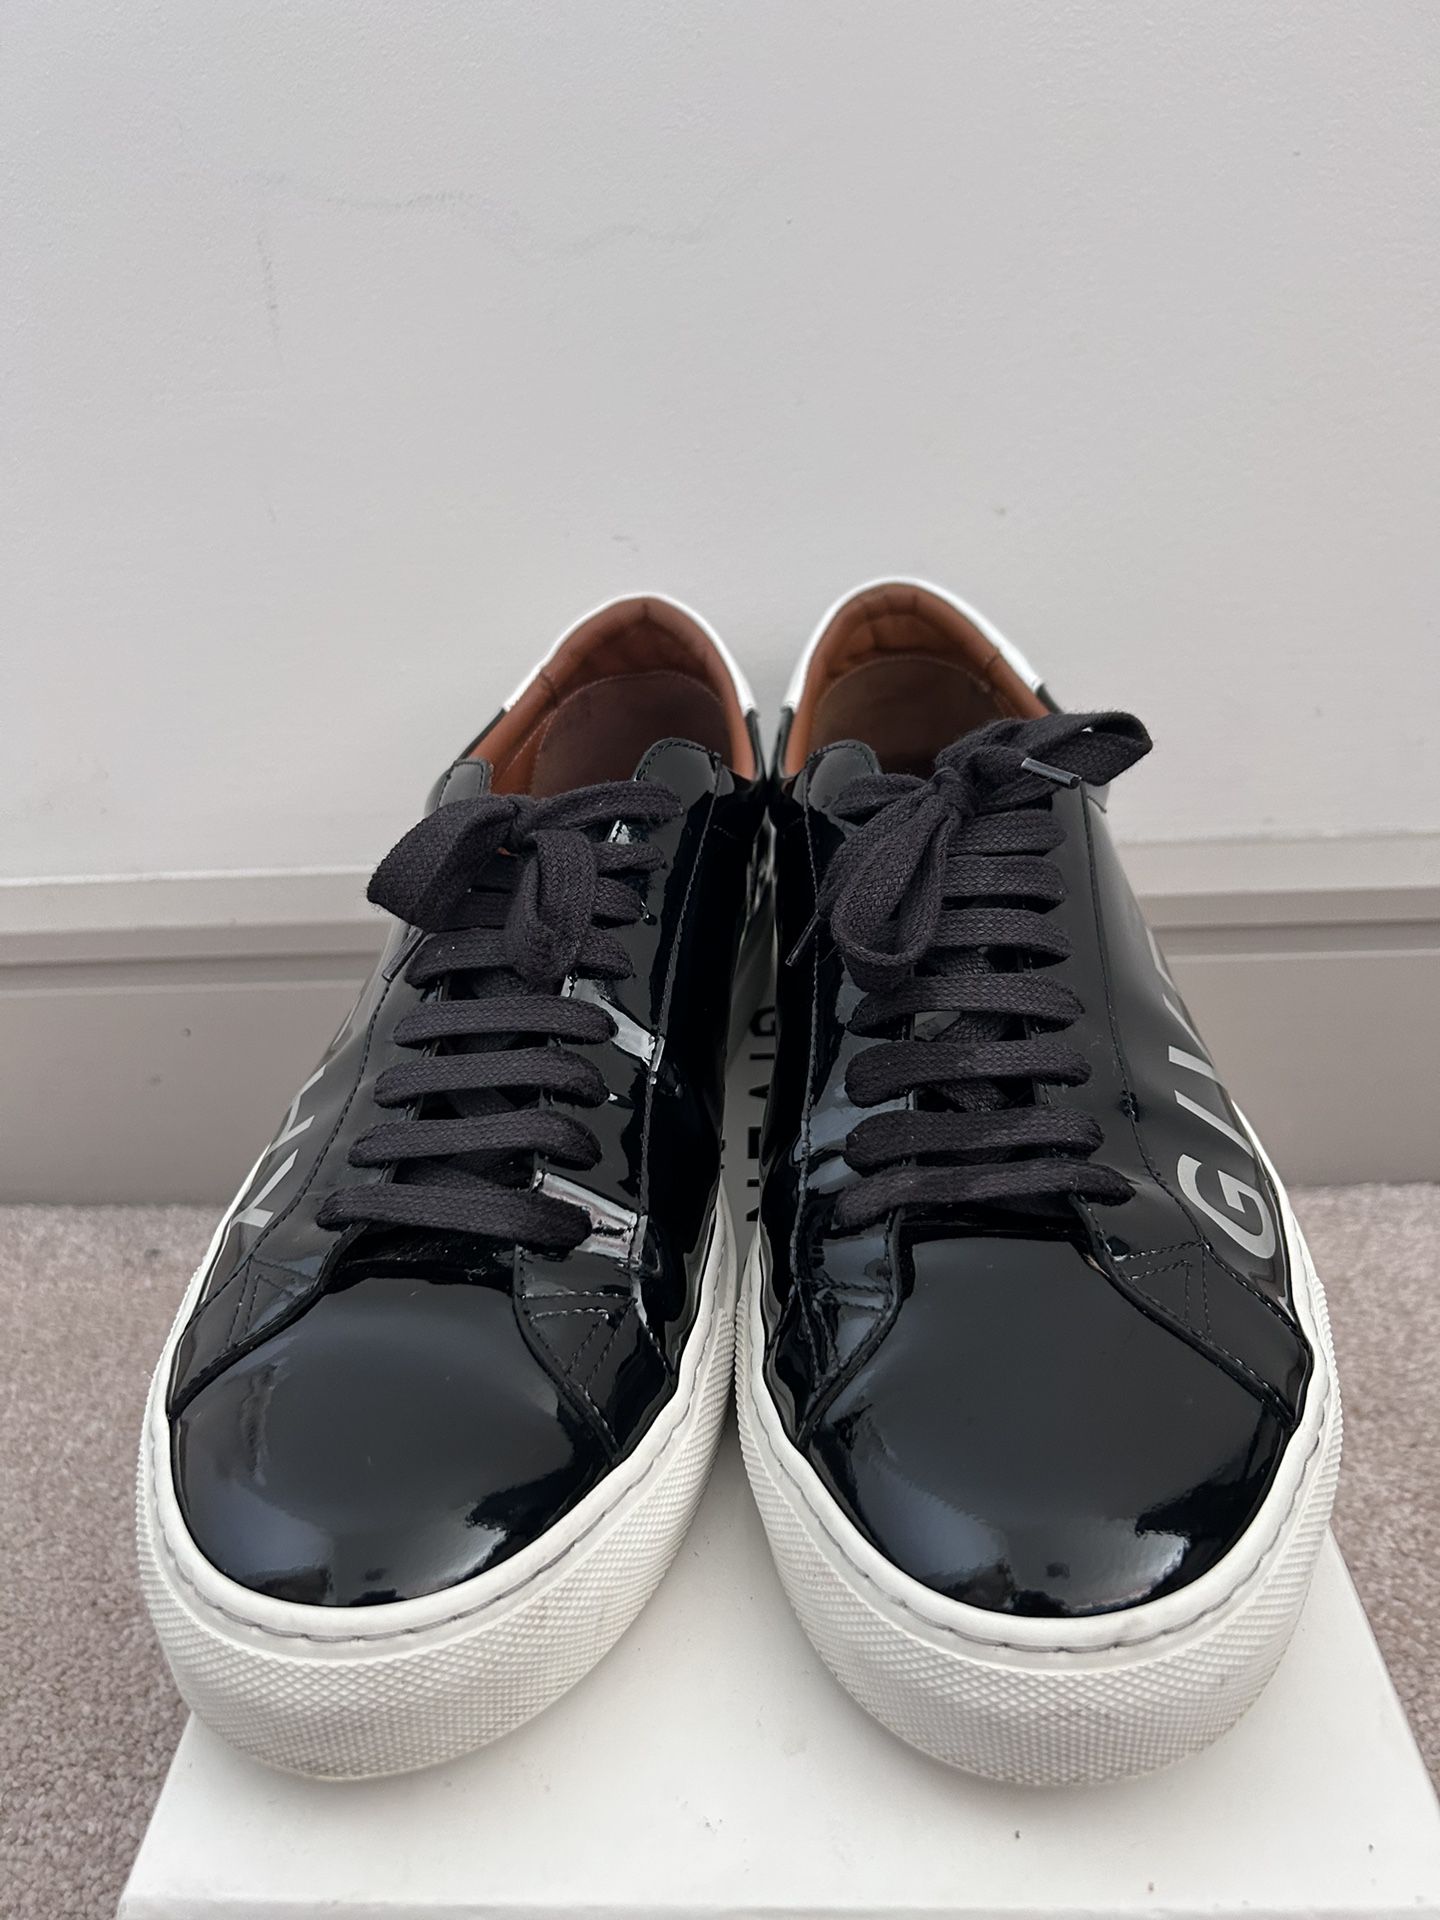 Givenchy Sneakers for Sale in Charlotte, NC - OfferUp